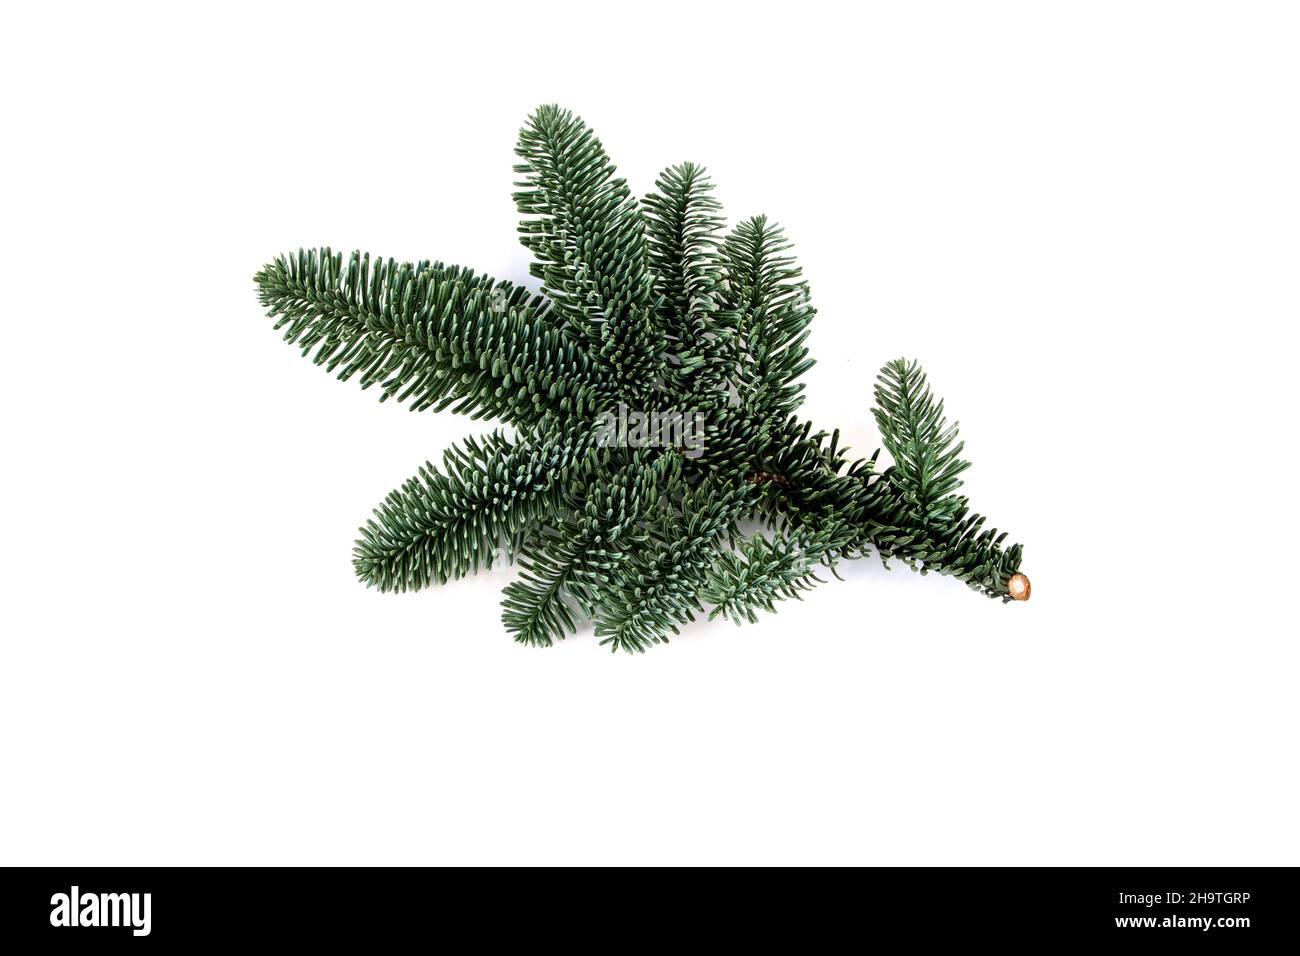 Blue fir tree branch isolated on white. Christmas decoration plant. Abies procera. Stock Photo